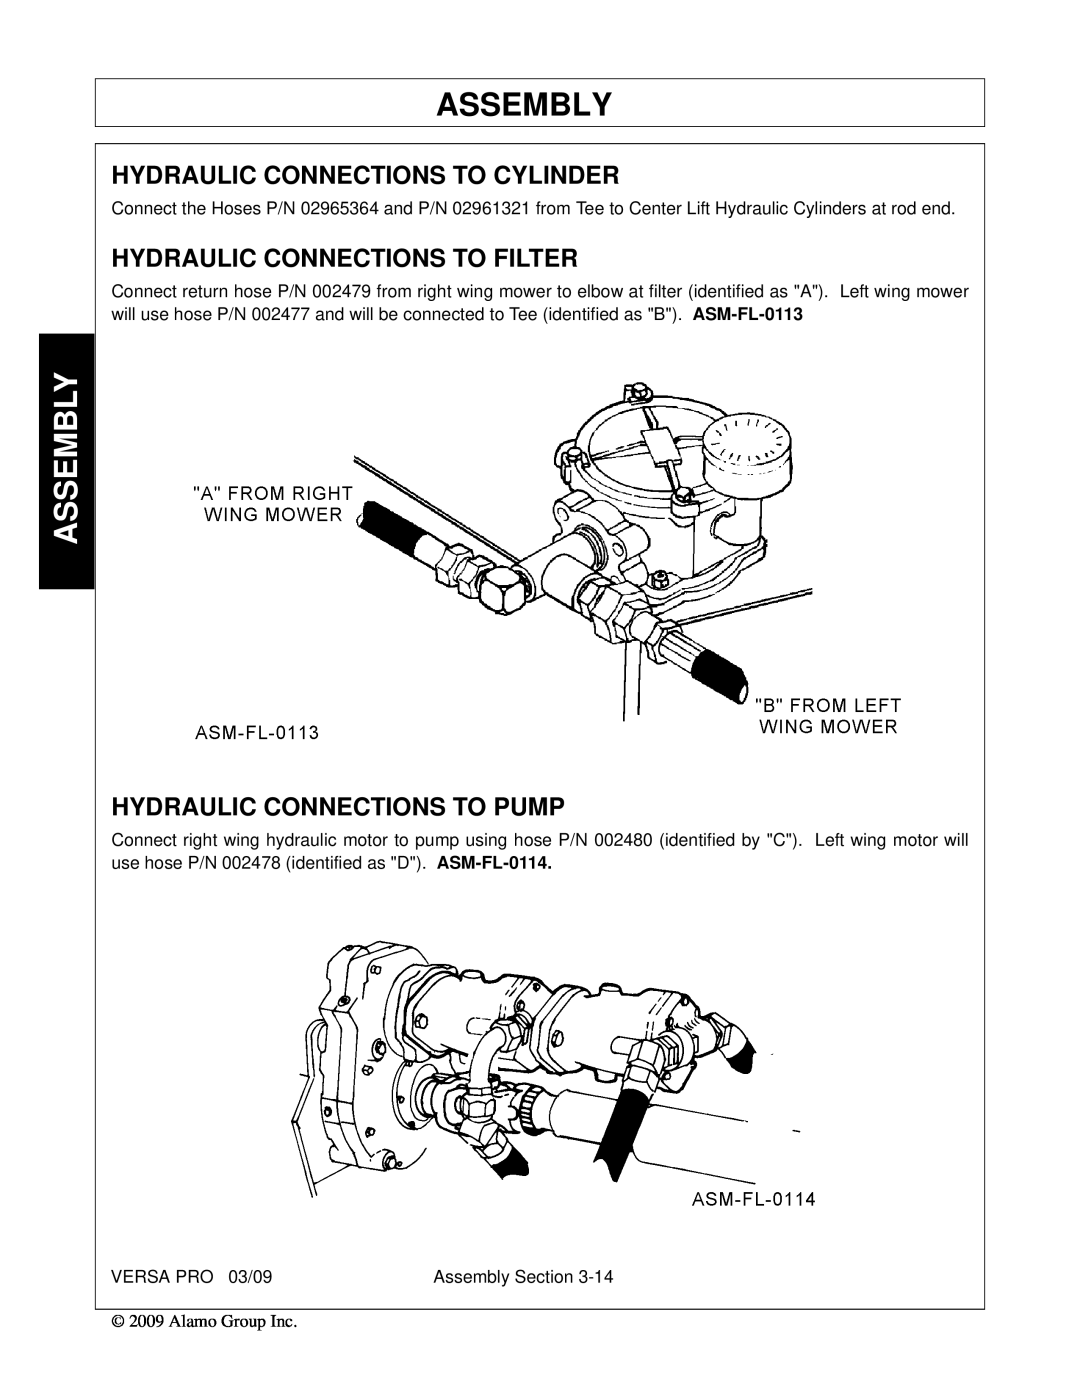 Alamo 803350C Hydraulic Connections To Cylinder, Hydraulic Connections To Filter, Hydraulic Connections To Pump, Assembly 